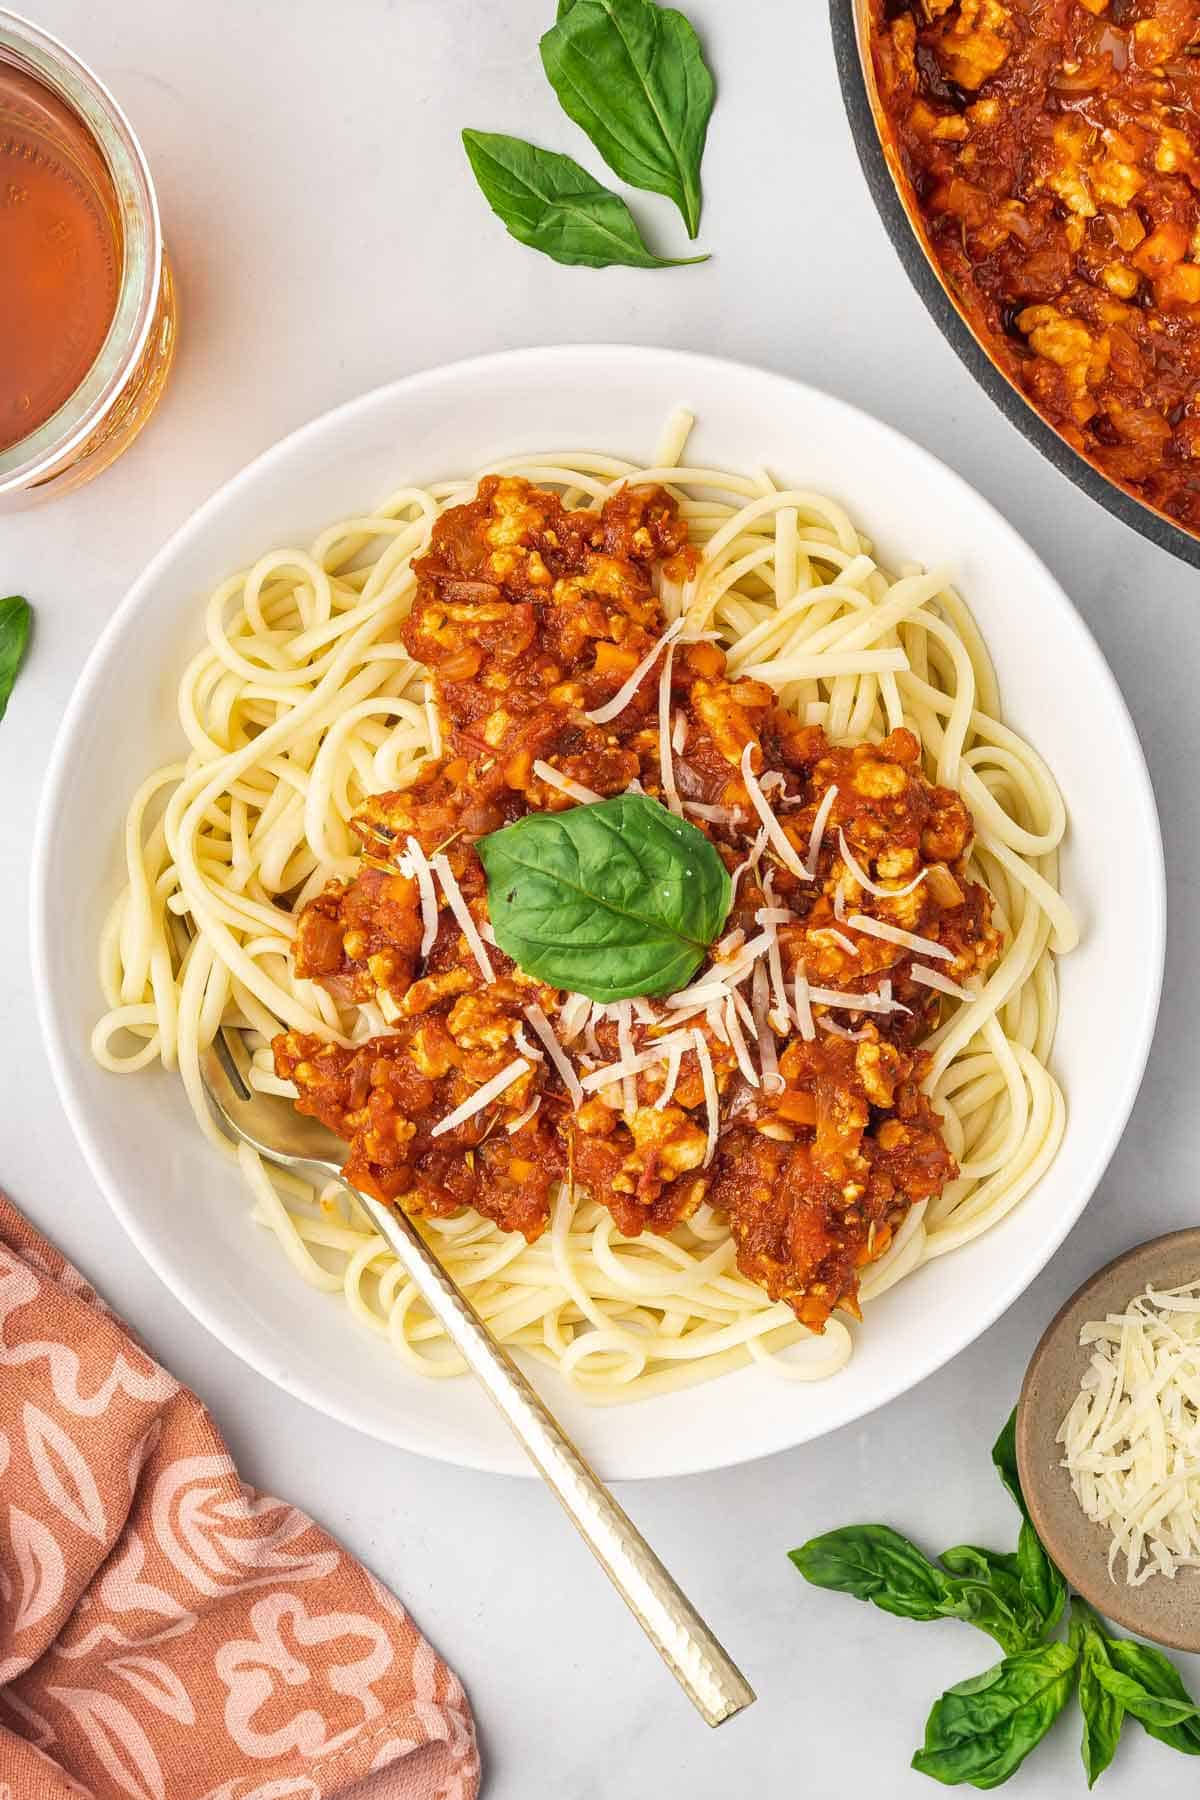 A plate spaghetti noodles with ground chicken bolognese on top with shredded cheese and fresh basil.